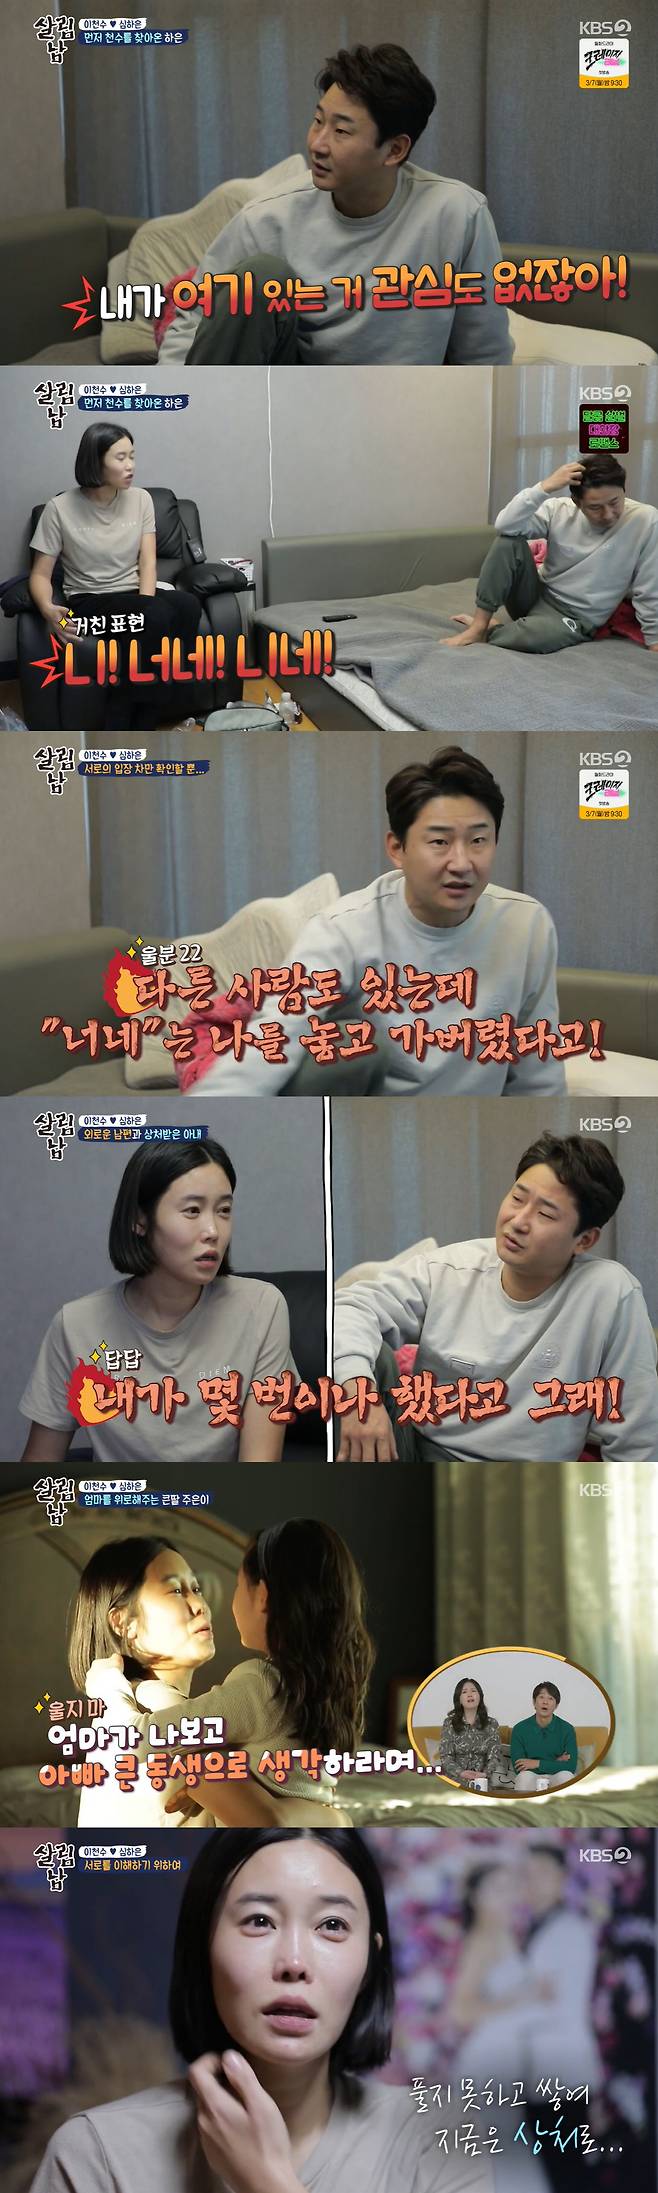 Former footballer Lee Chun-soo has been in conflict with wife Shim Ha-eun over a marital fight.On KBS2s Saving Men Season 2 (hereinafter referred to as Mr. House Husband 2) broadcast on the 19th, a day of the new Salimnam Lee Chun-soo was released.Lee Chun-soo, who was lonely while eating raw ramen alone on the second floor of his double-story home, said, If you do not have a schedule, you will watch TV in your room.On the first floor, his wife, Shim Ha-eun, was looking after her three children; Lee Chun-soo said, I am not going down on the first floor because of the behavior of my big daughter, Ju-eun.I was in the room for three days. There is no big problem. There is a bathroom on the second floor. When my husband is sprained and sprained, I go to the room; Ive seen soothing before, but its too much from when, its hard after twin births, Shim Ha-eun said.I was excited because my acquaintance promised to ride a bicycle with Ju-eun, but suddenly my husband was excited and wore equipment and came down.When I told him that he was not going, he said,  (my husband) says, Ya, Im not playing! He was embarrassed by his appearance. Lee Chun-soo, who ordered delivery food without knowing his family, sneaked down to the first floor to get food, but she was found by Yang, and she said, Mom!Father ordered delivery food. Lee Chun-soo ate alone and said, Why does the gift go to my mother? Why do you stand for her?I was sad.A moment later Lee Chun-soo suddenly began to annoy, calling out his wifes name loudly, then pointed to a broken monitor pushed by an open window.Lee Chun-soo said, Its a 1.7 million won monitor Ive never written before, and after two months of setting, I decided to write it now, but I fell down.I was so upset, he said. Why do you keep the door open without cleaning? The house worker is not checking it and doing what.Shim Ha-eun expressed his injustice, saying, Im not even coming in here, Im not opening the door. The tone grew louder, and Shim Ha-eun said, Its a big deal, be quiet.Why are you shouting? said Furious Lee Chun-soo, who also roared at Ms. Zueun, saying, What are you saying because youre wrong?Lee Chun-soo told the production team, Im a spitting style without thinking, and when I talk, I put Ya on it. This is a habit.Shim Ha-eun told Ms. Ju-eun, I wish I could think and tell you why Im angry... I think Ive been a strong speaker of athletic life.We need to talk to Father more. Jun showed a sense of touching Mom is hard? Do not be hard. Shim Ha-eun went to Lee Chun-soos room and said, I went to an angry state and had nothing to say. If I felt bad, I said you without hesitation.Then the children are scared. Lee Chun-soo said, Im lonely and hard. You guys dont even think of me. Did you care if I died here for three days?Shim Ha-eun shouted: Take good talk with Ju-eun and reduce the screaming.I am doing well with the Feelings, but Lee Chun-soo said, I have done it several times. When opinions were not narrowed, Shim Ha-eun eventually shed tears; Ms. Zueun approached and comforted Shim Ha-eun.Shim Ha-eun said, I am so upset and my husbands tone hurts the arrogance I feel.Lee Chun-soo said: I live under one roof but I have Feelings, two families, I dont think I can permeate my family, my heart hurts so much.I want to be a good father good husband who communicates a lot, not just my husband. 